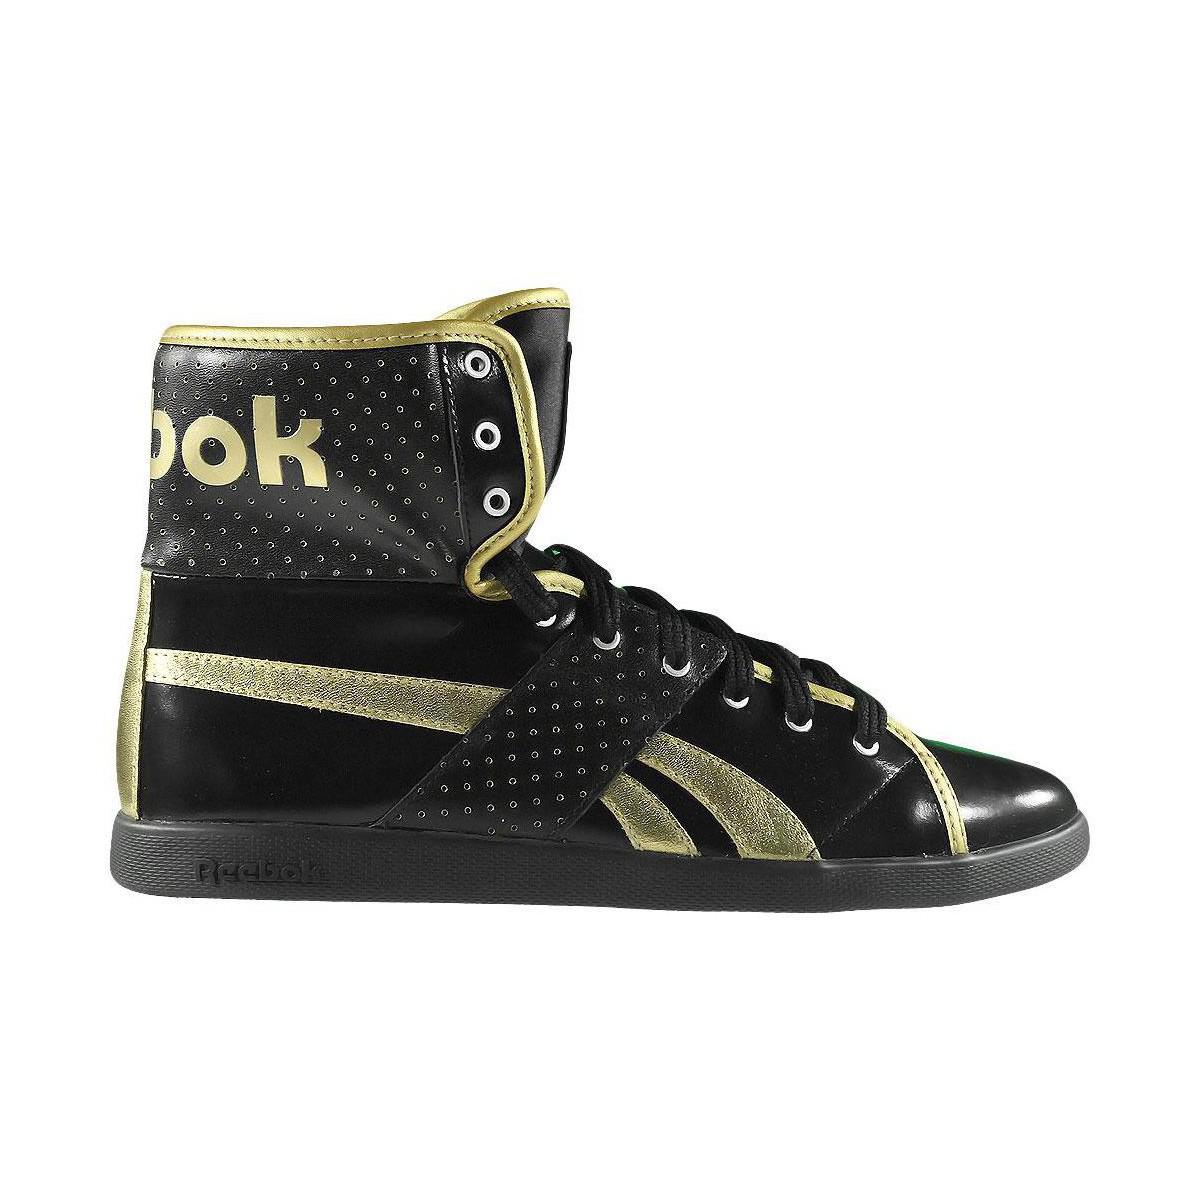 black and gold reebok high tops off 50 